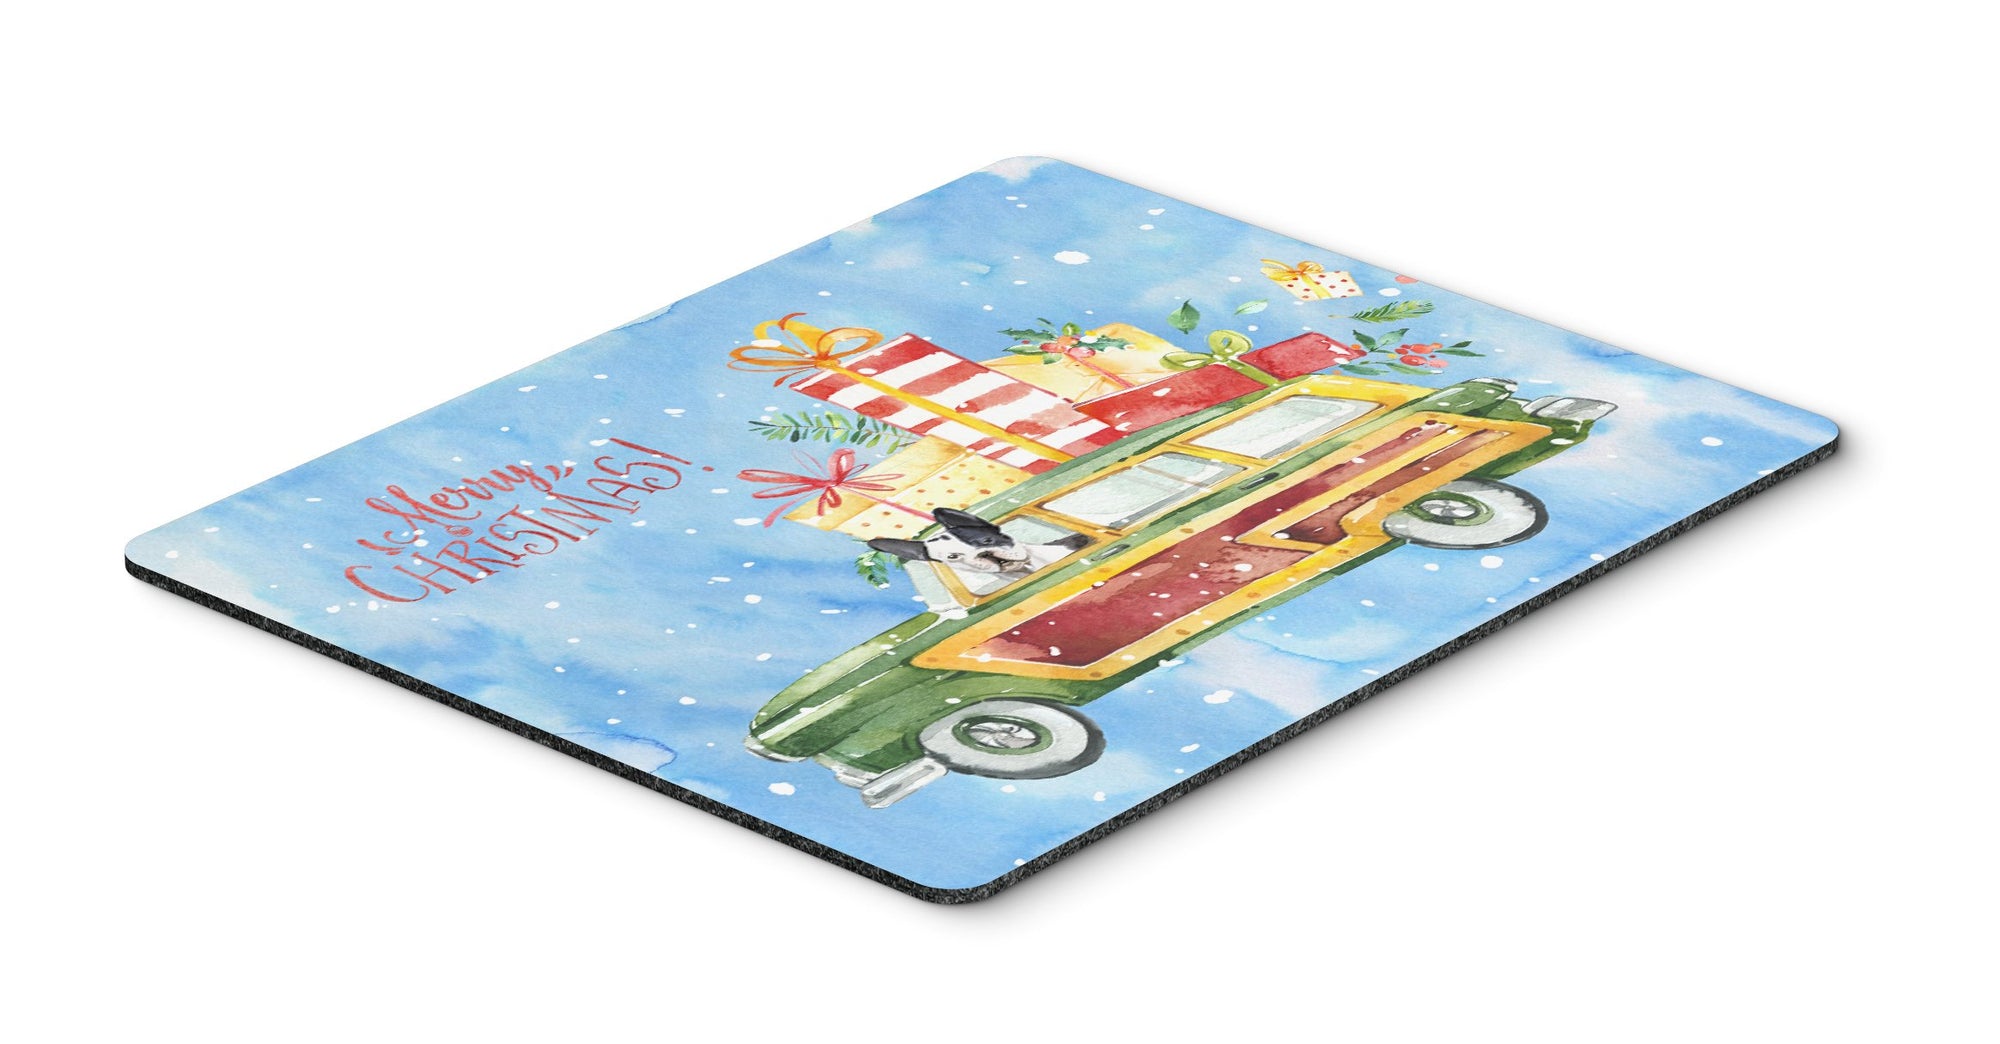 Merry Christmas French Bulldog Mouse Pad, Hot Pad or Trivet CK2444MP by Caroline's Treasures